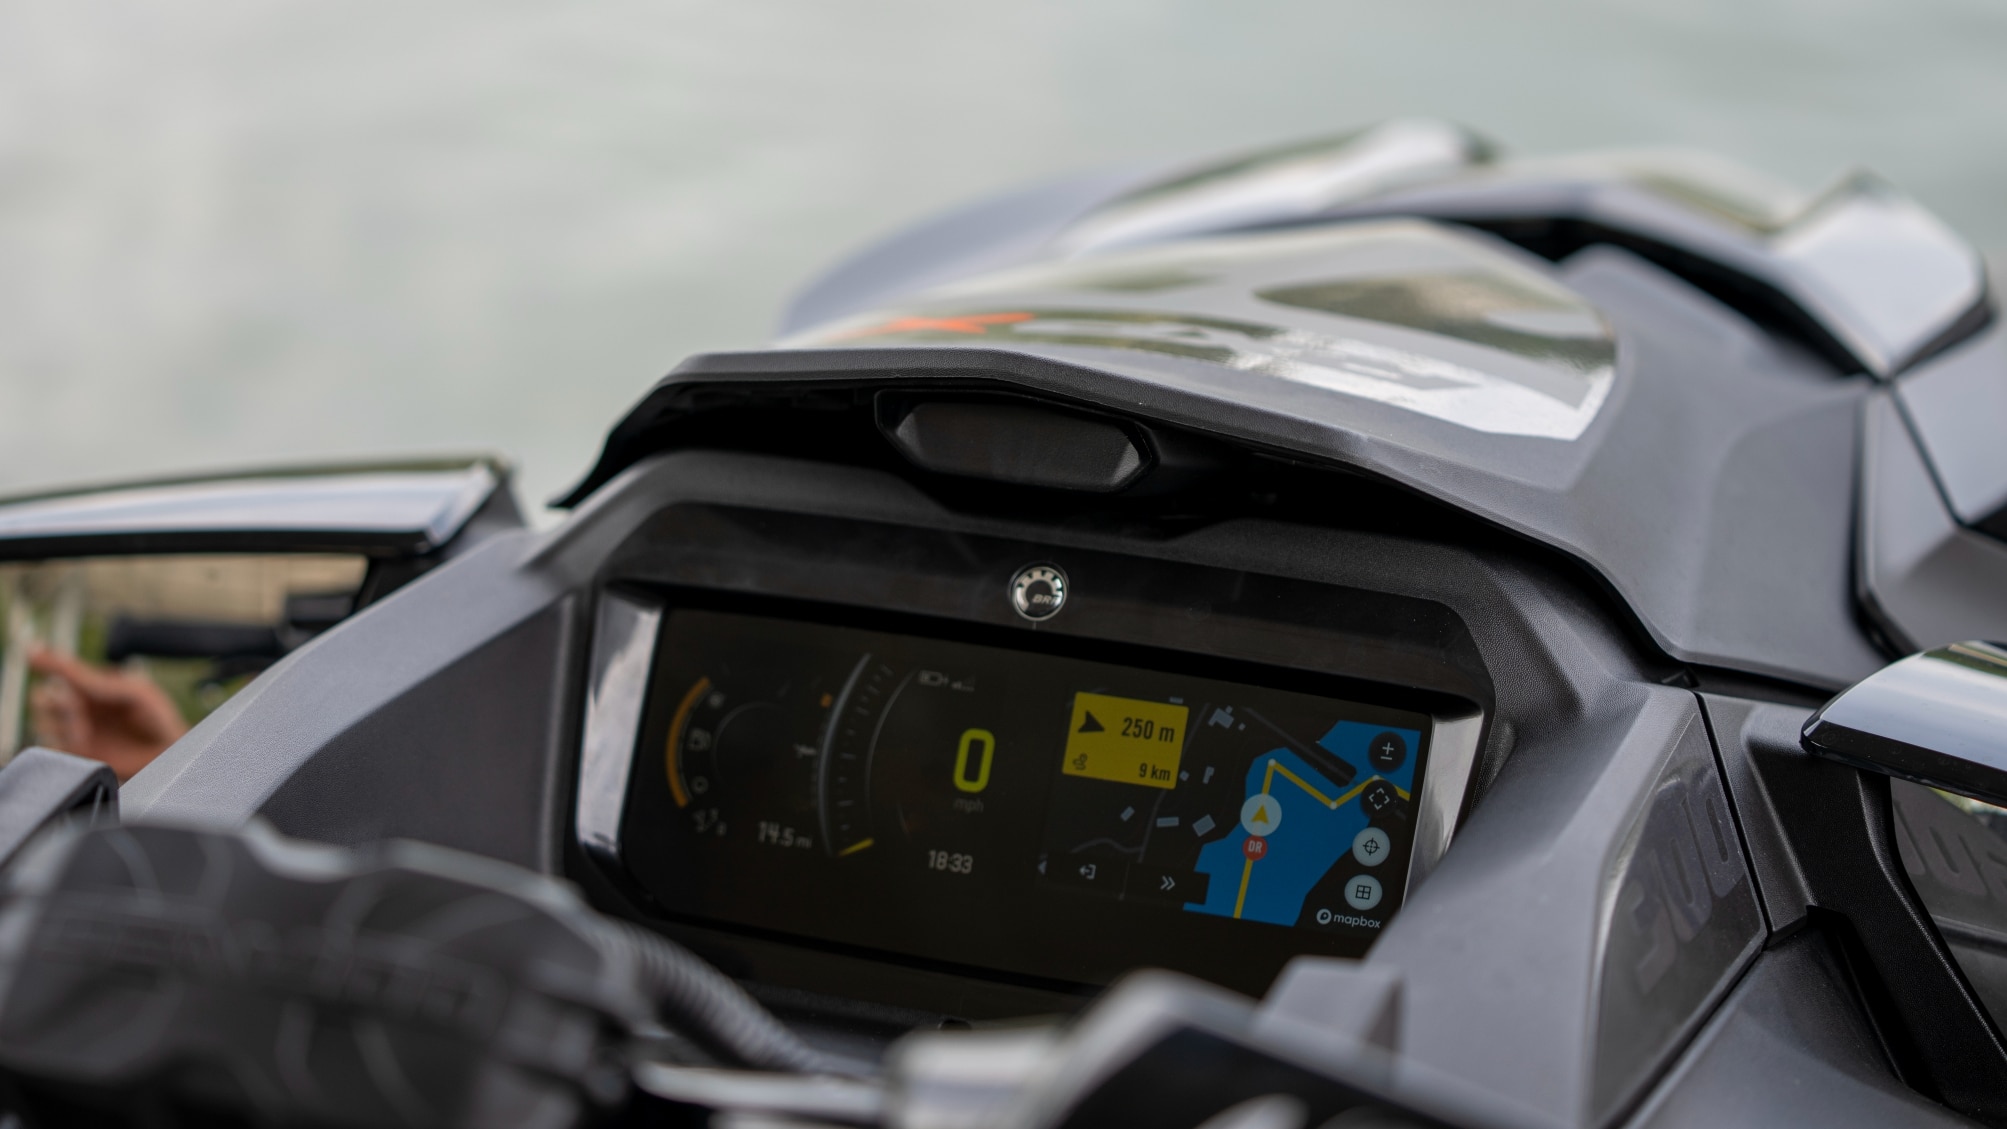 The BRP GO! navigation app on a Sea-Doo’s 7.8” LCD color display